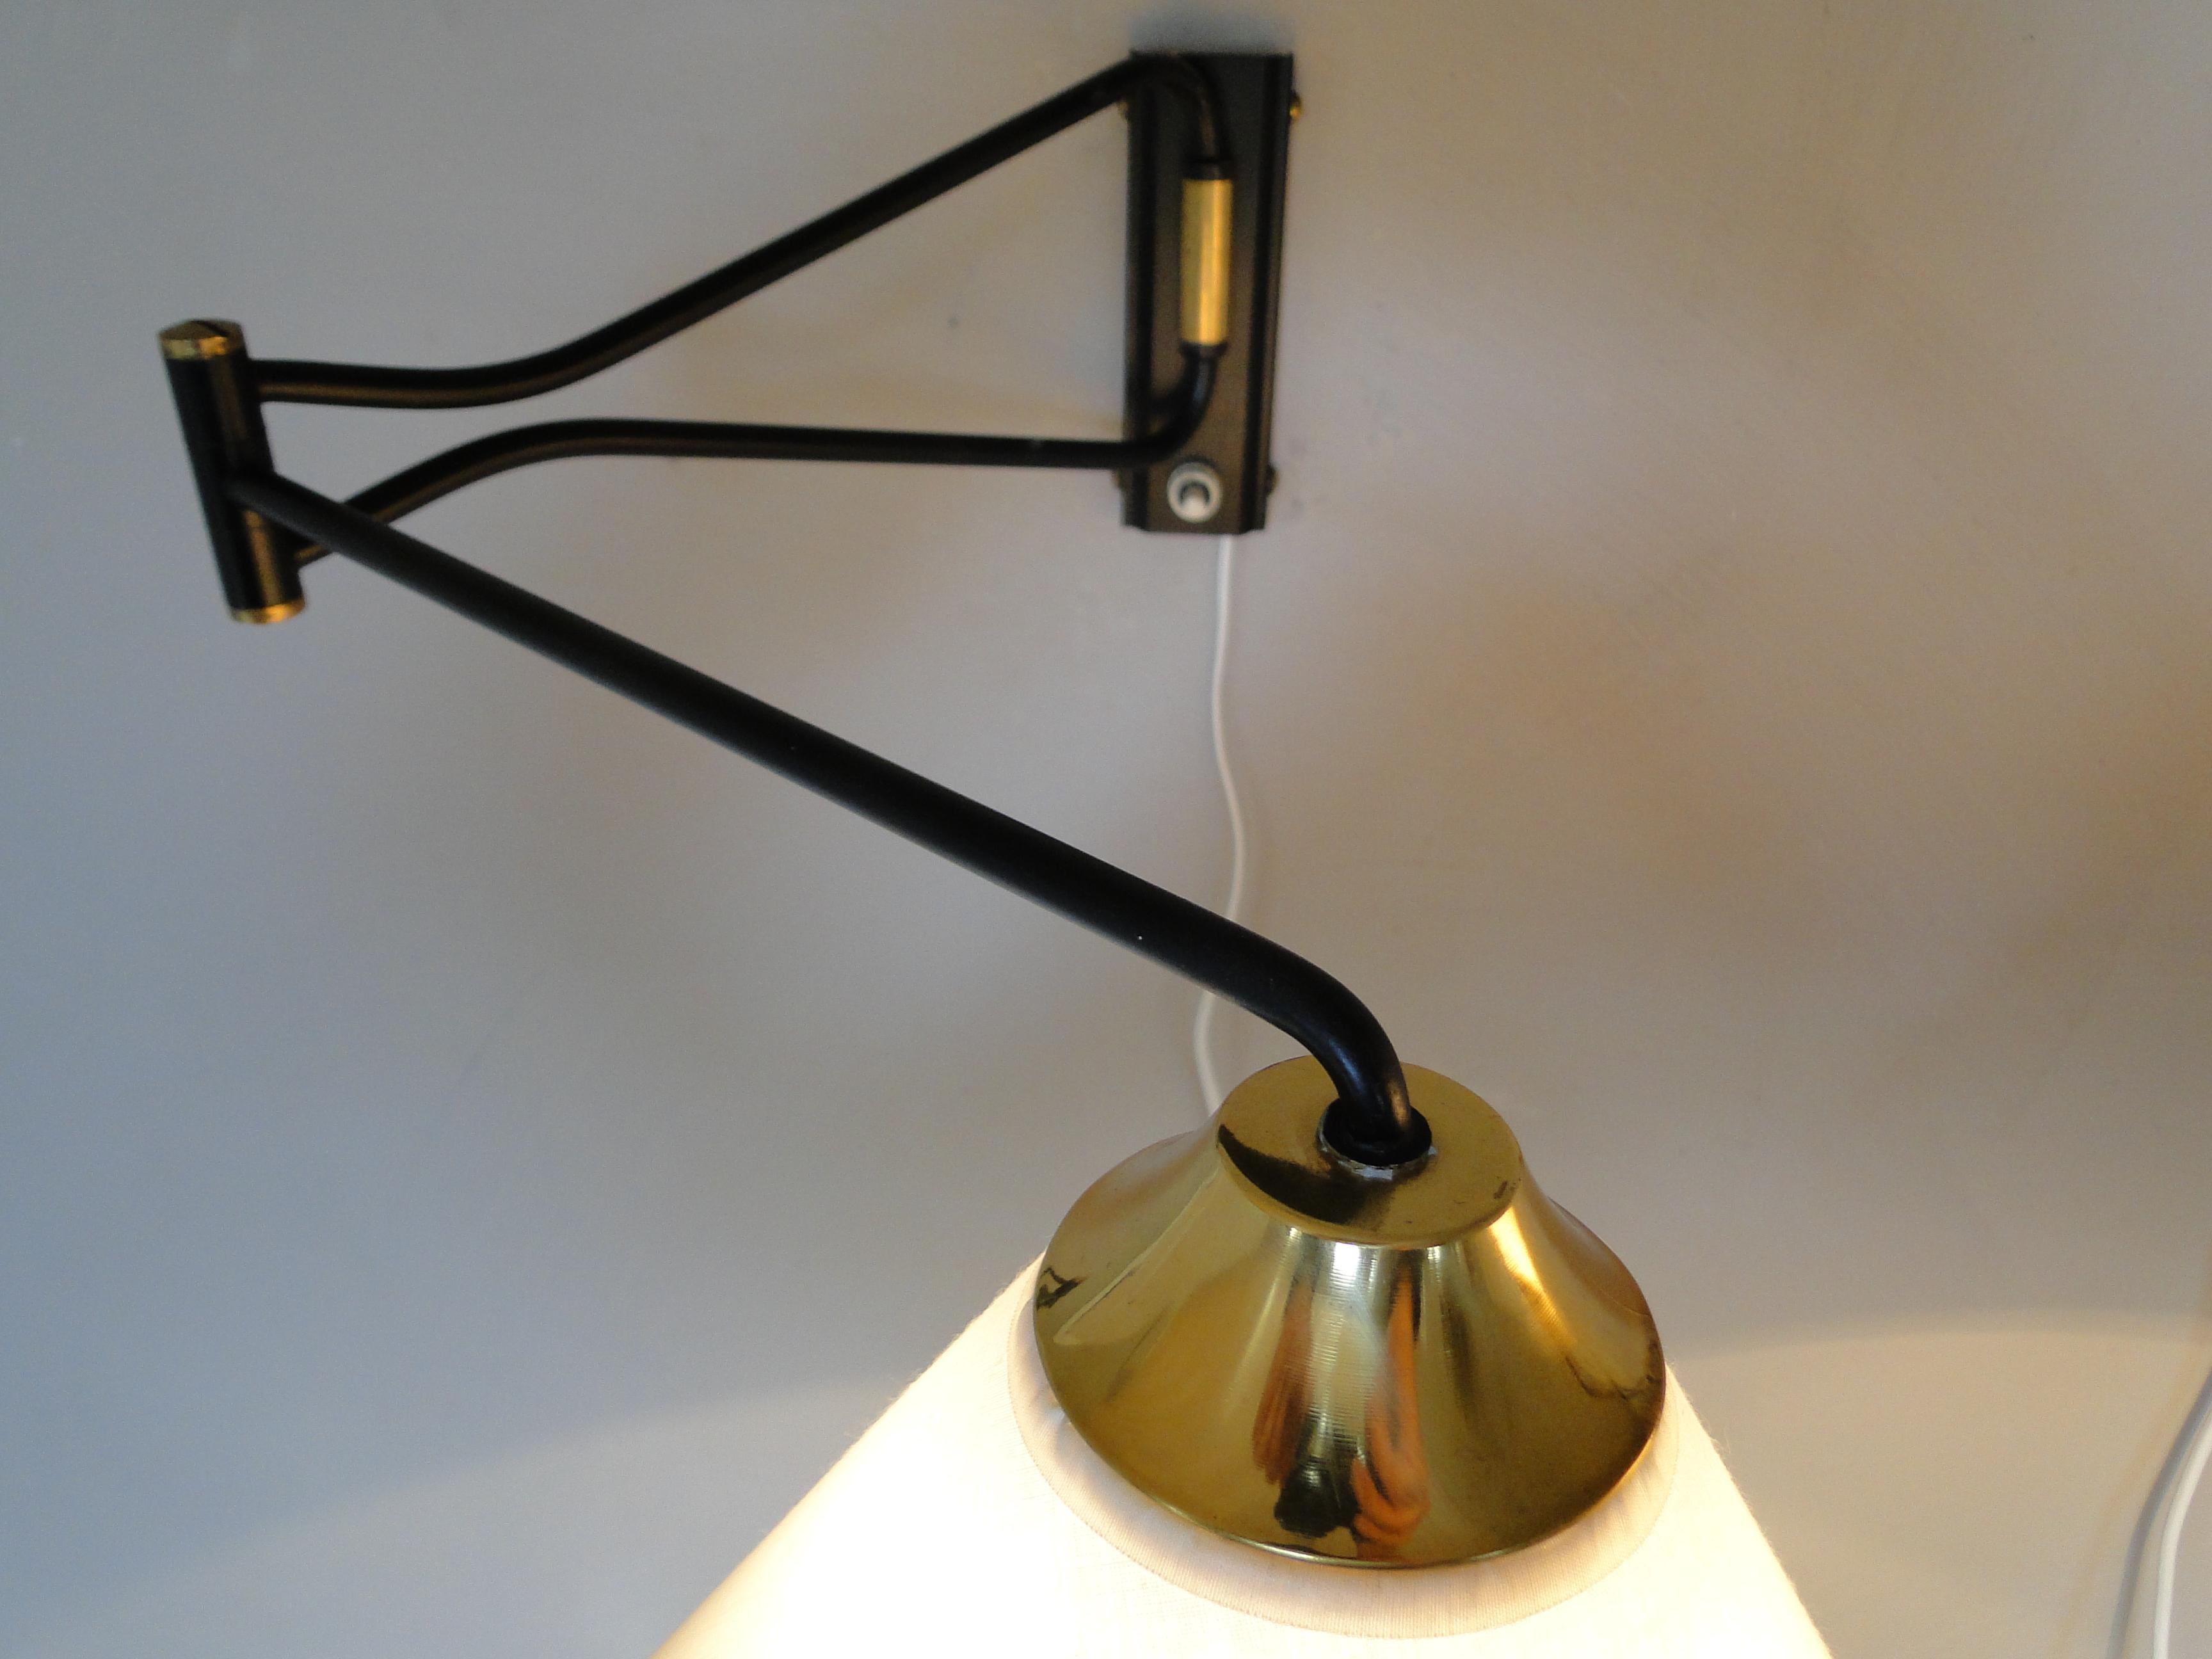  Pair of Rene Mathieu Swing Arm Sconces Wall lamp French Adjustable  Lunel Arlus For Sale 1